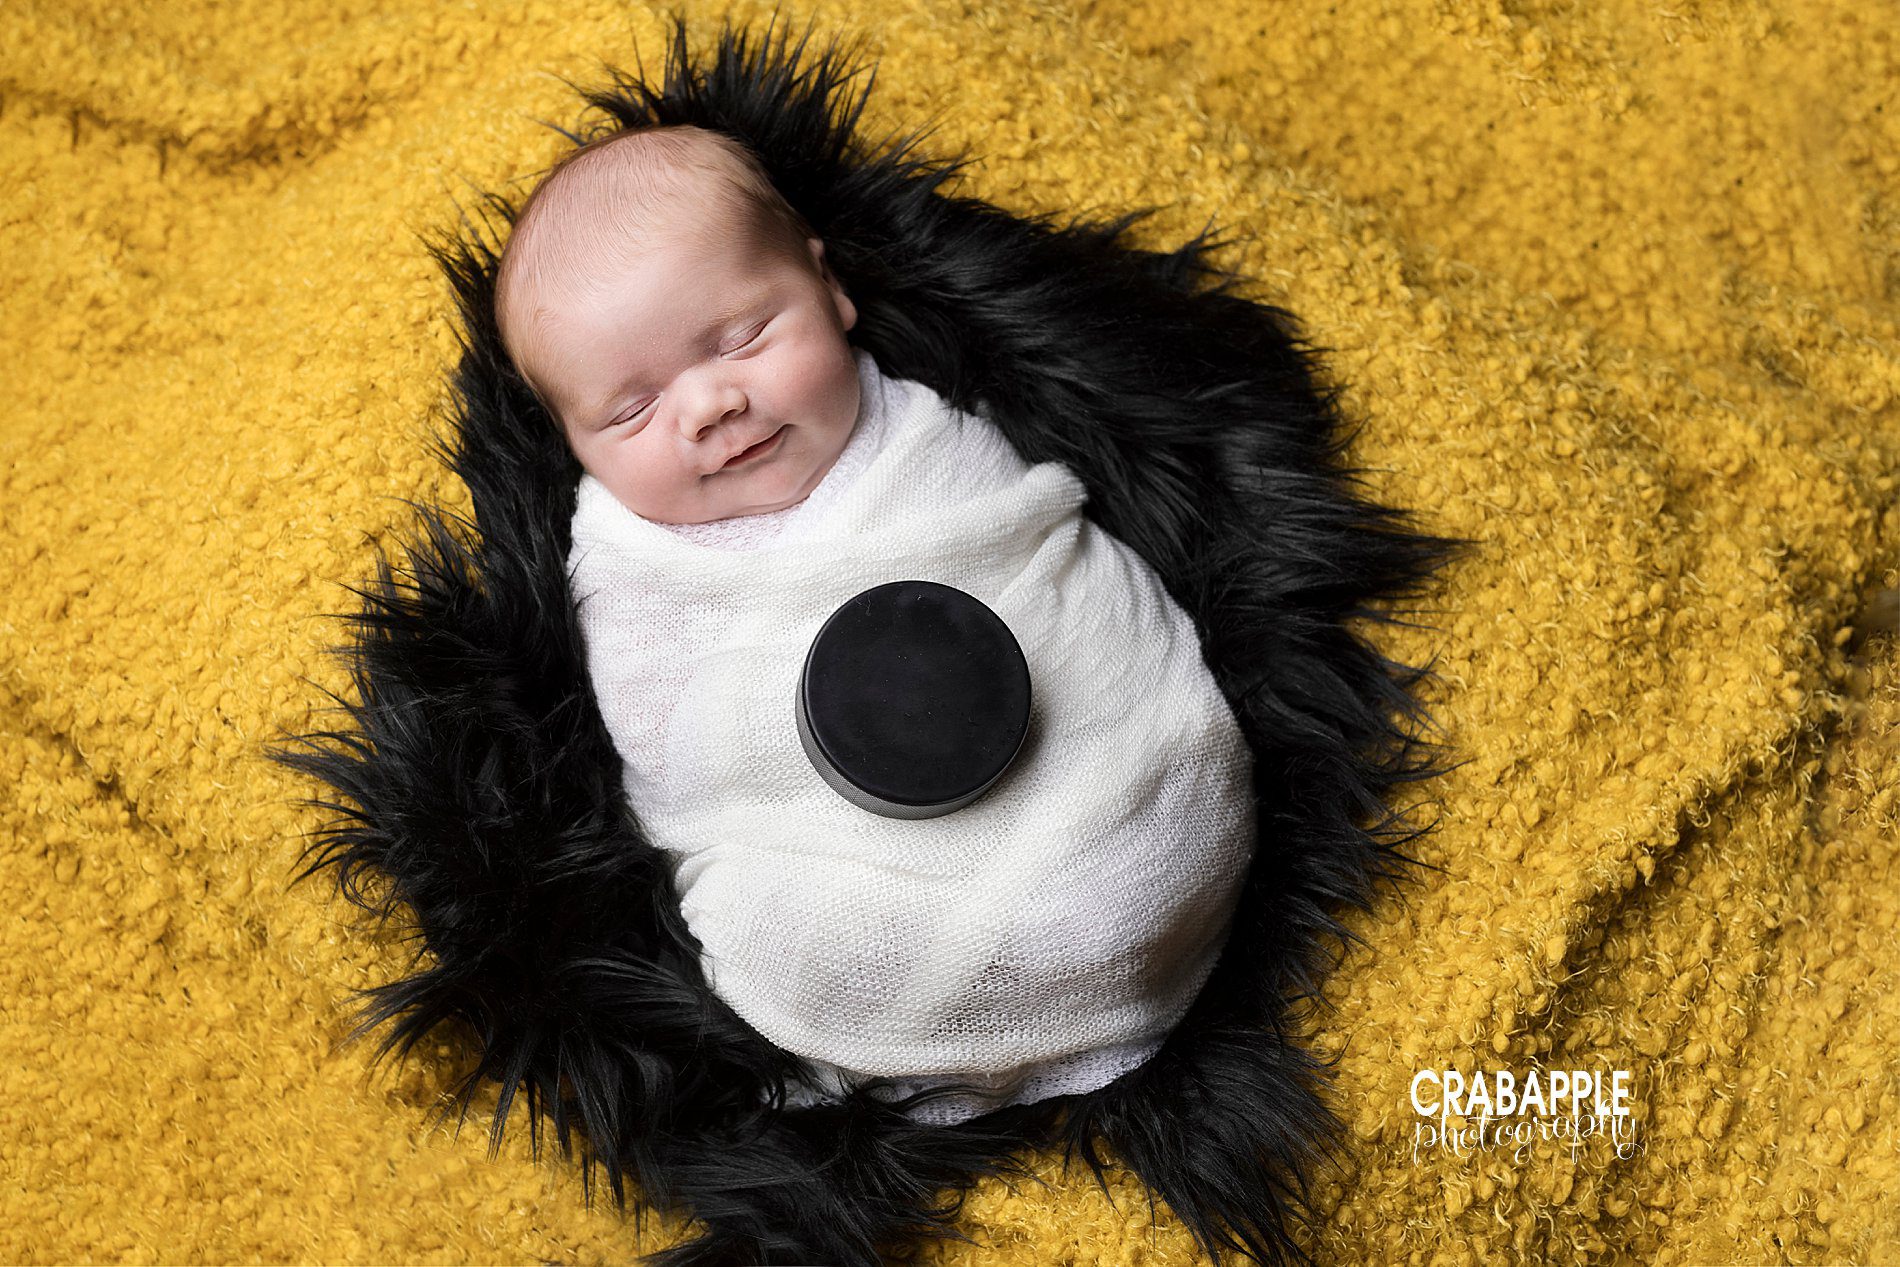 Classic and timeless Boston Bruins themed newborn photos with puck